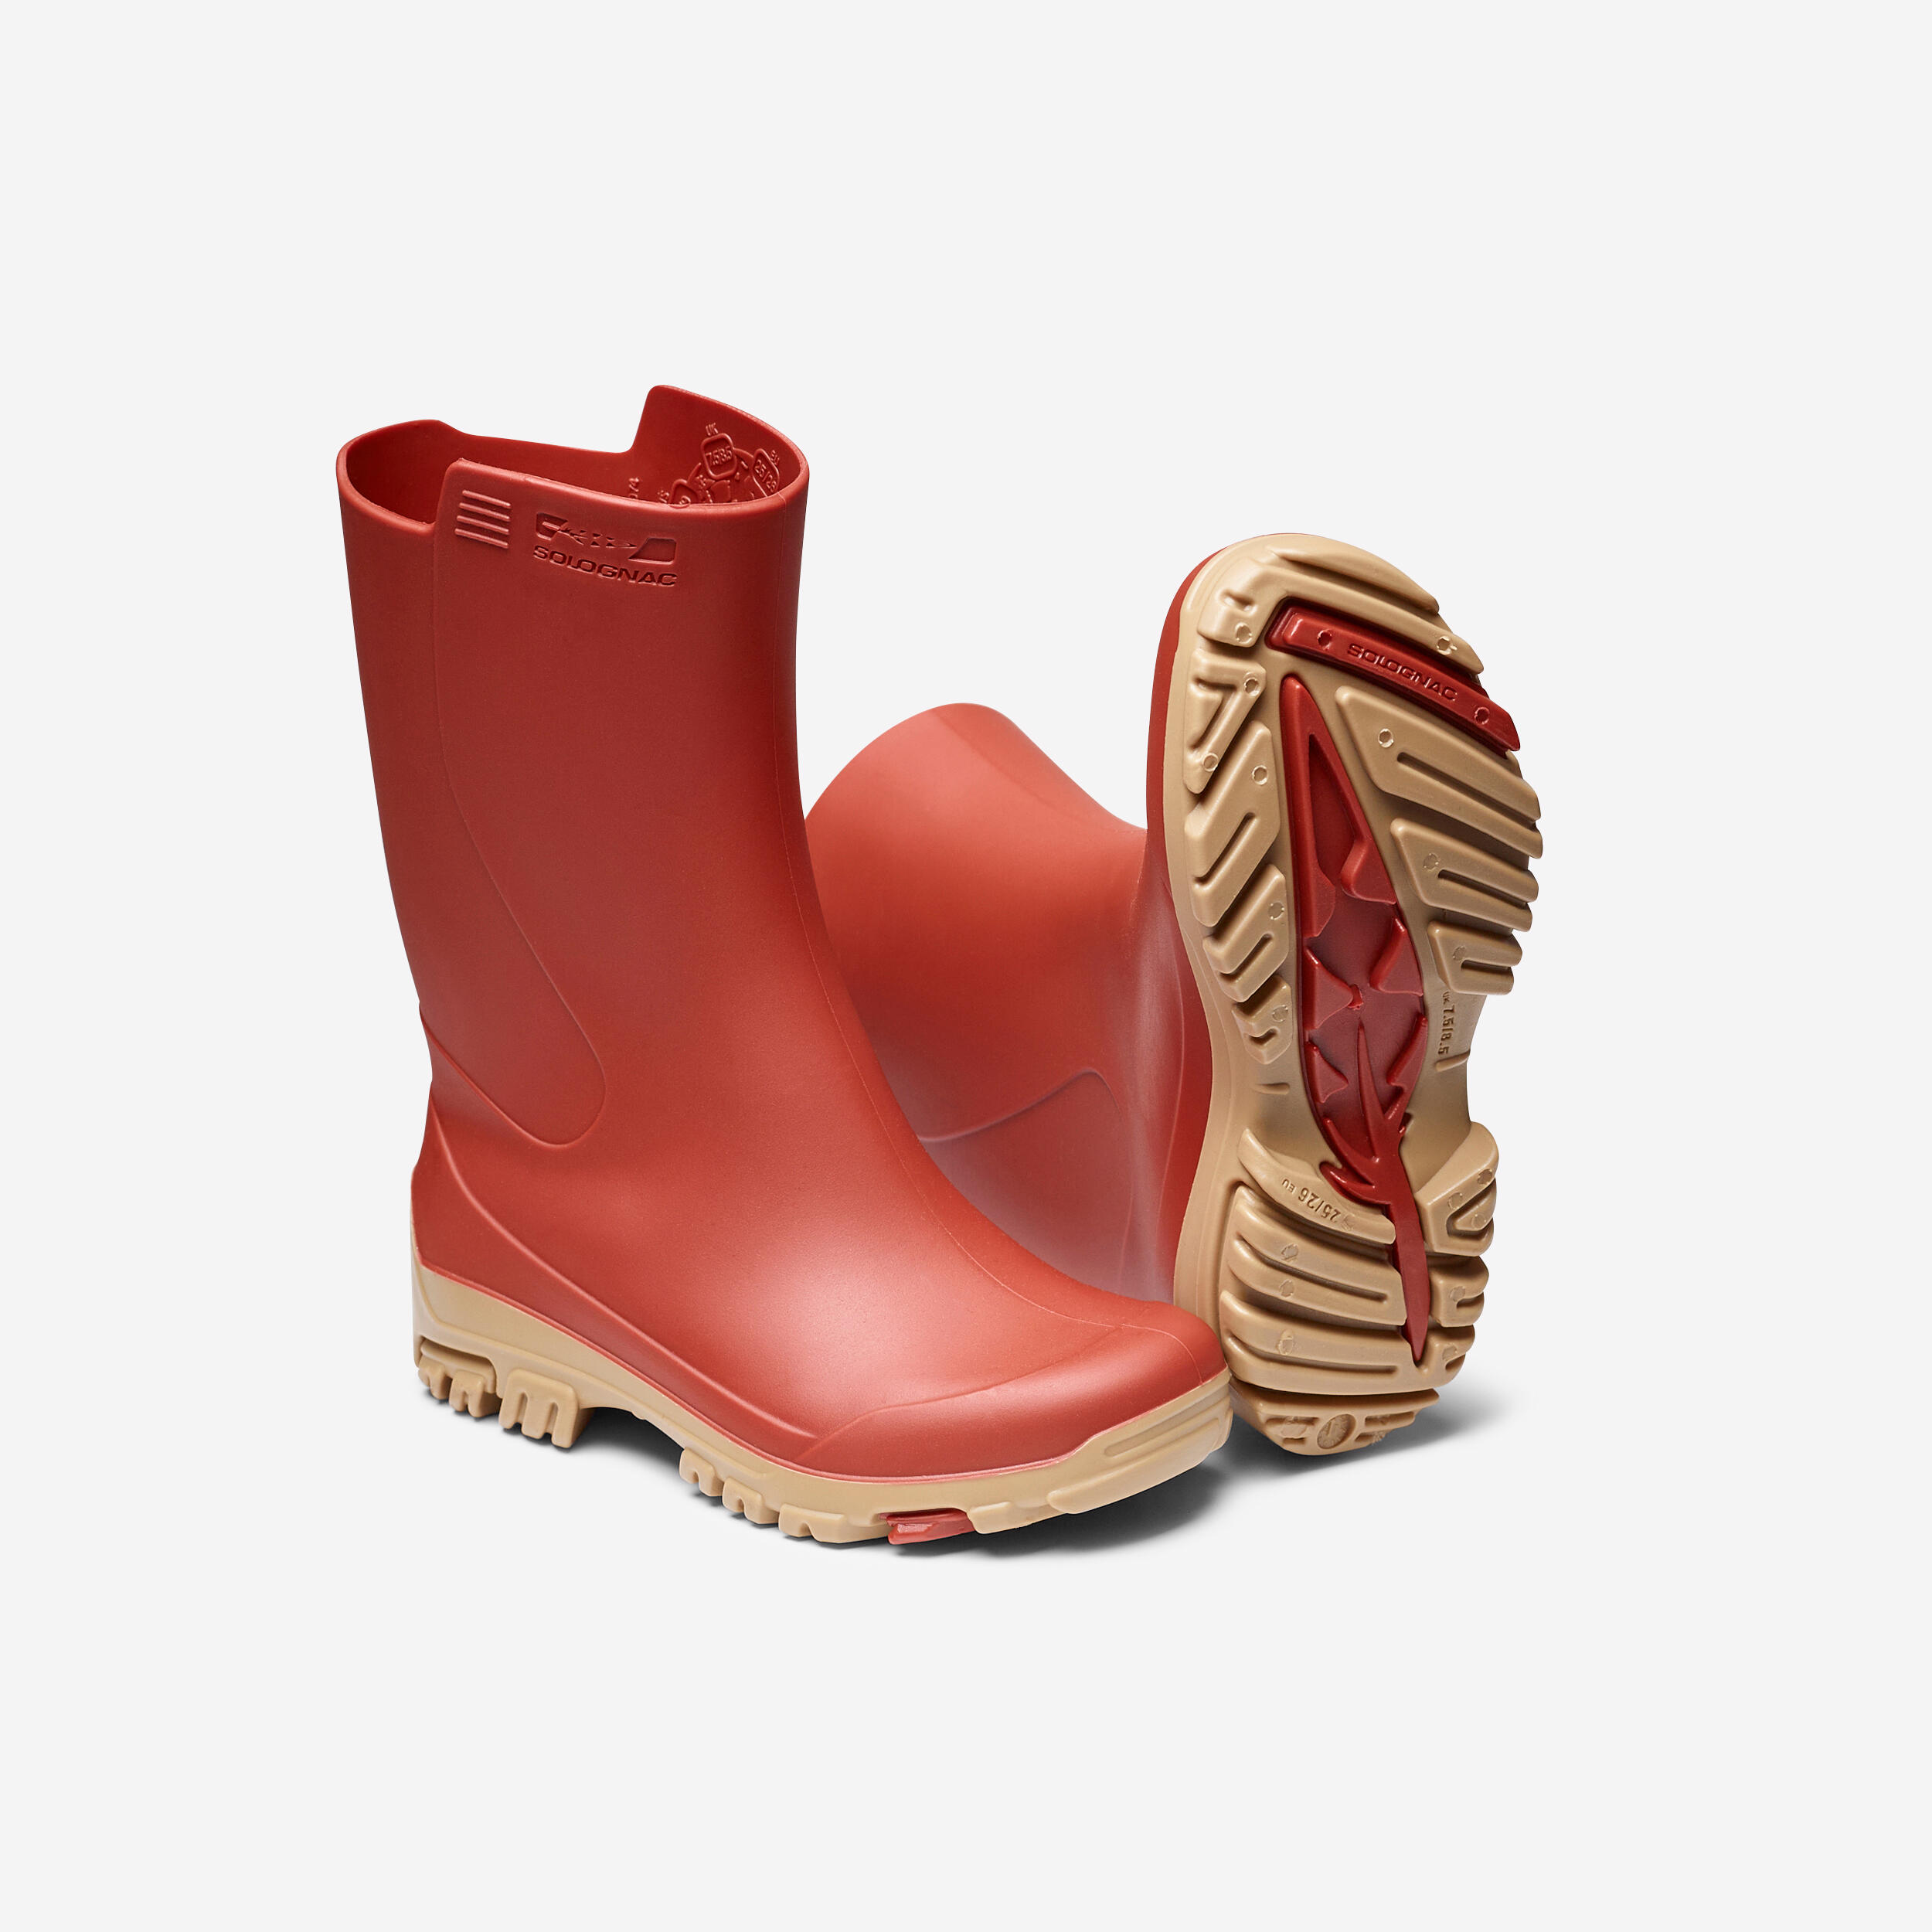 KIDS WELLIES 100 RED 1/9